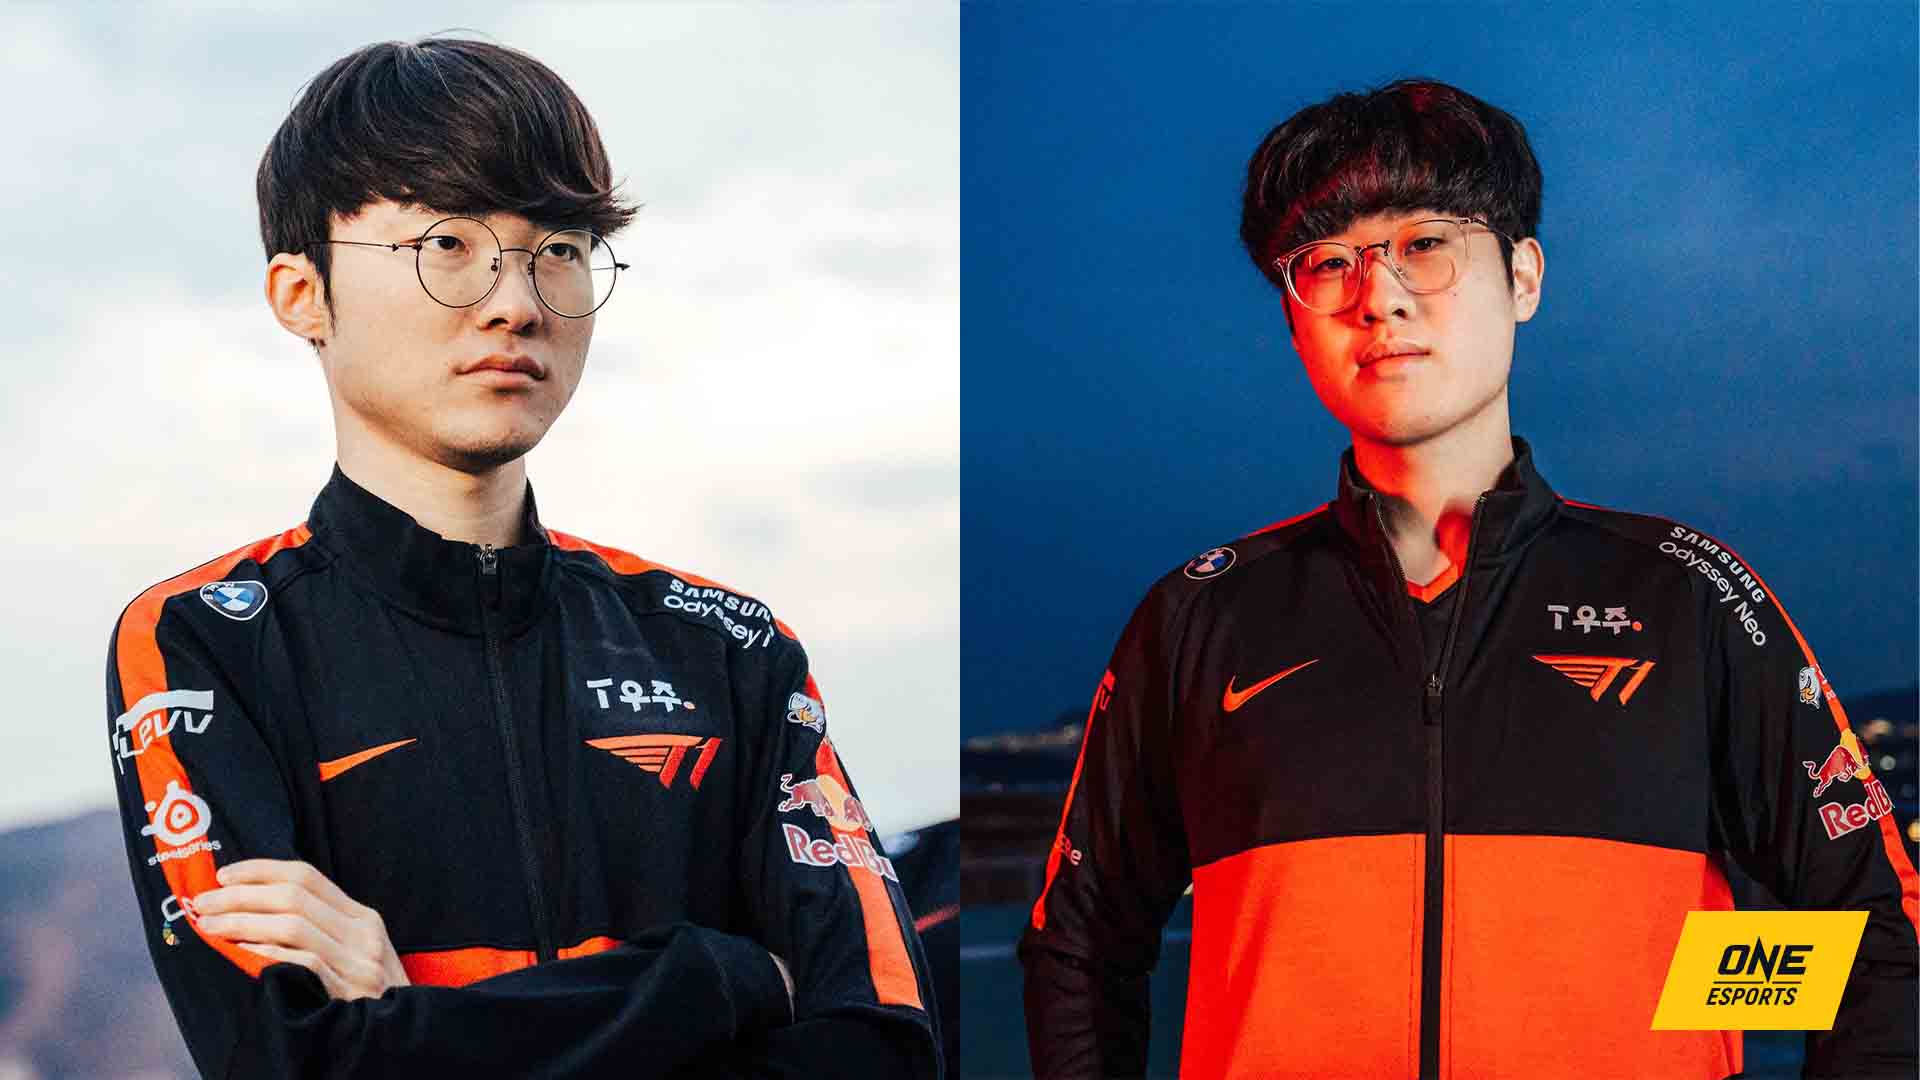 Faker is so tired of Oner & Zeus